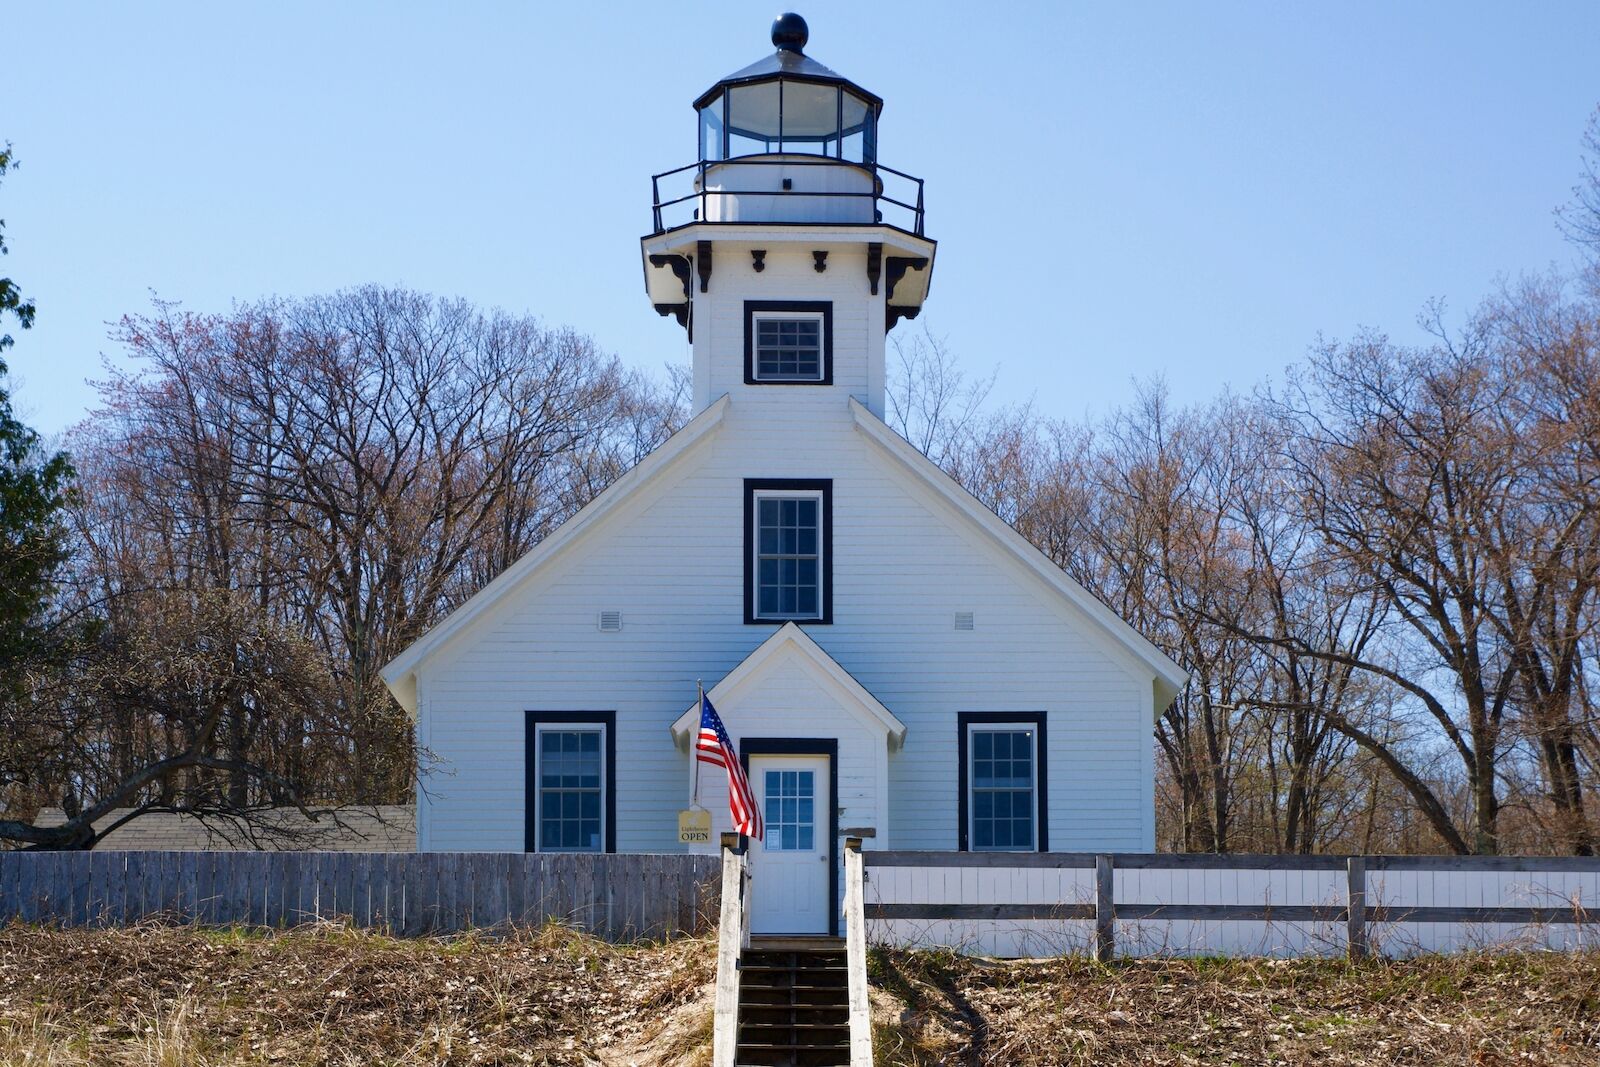 Mission Point Lighthouse is one of the few Michigan lighthouses where you can spend the night